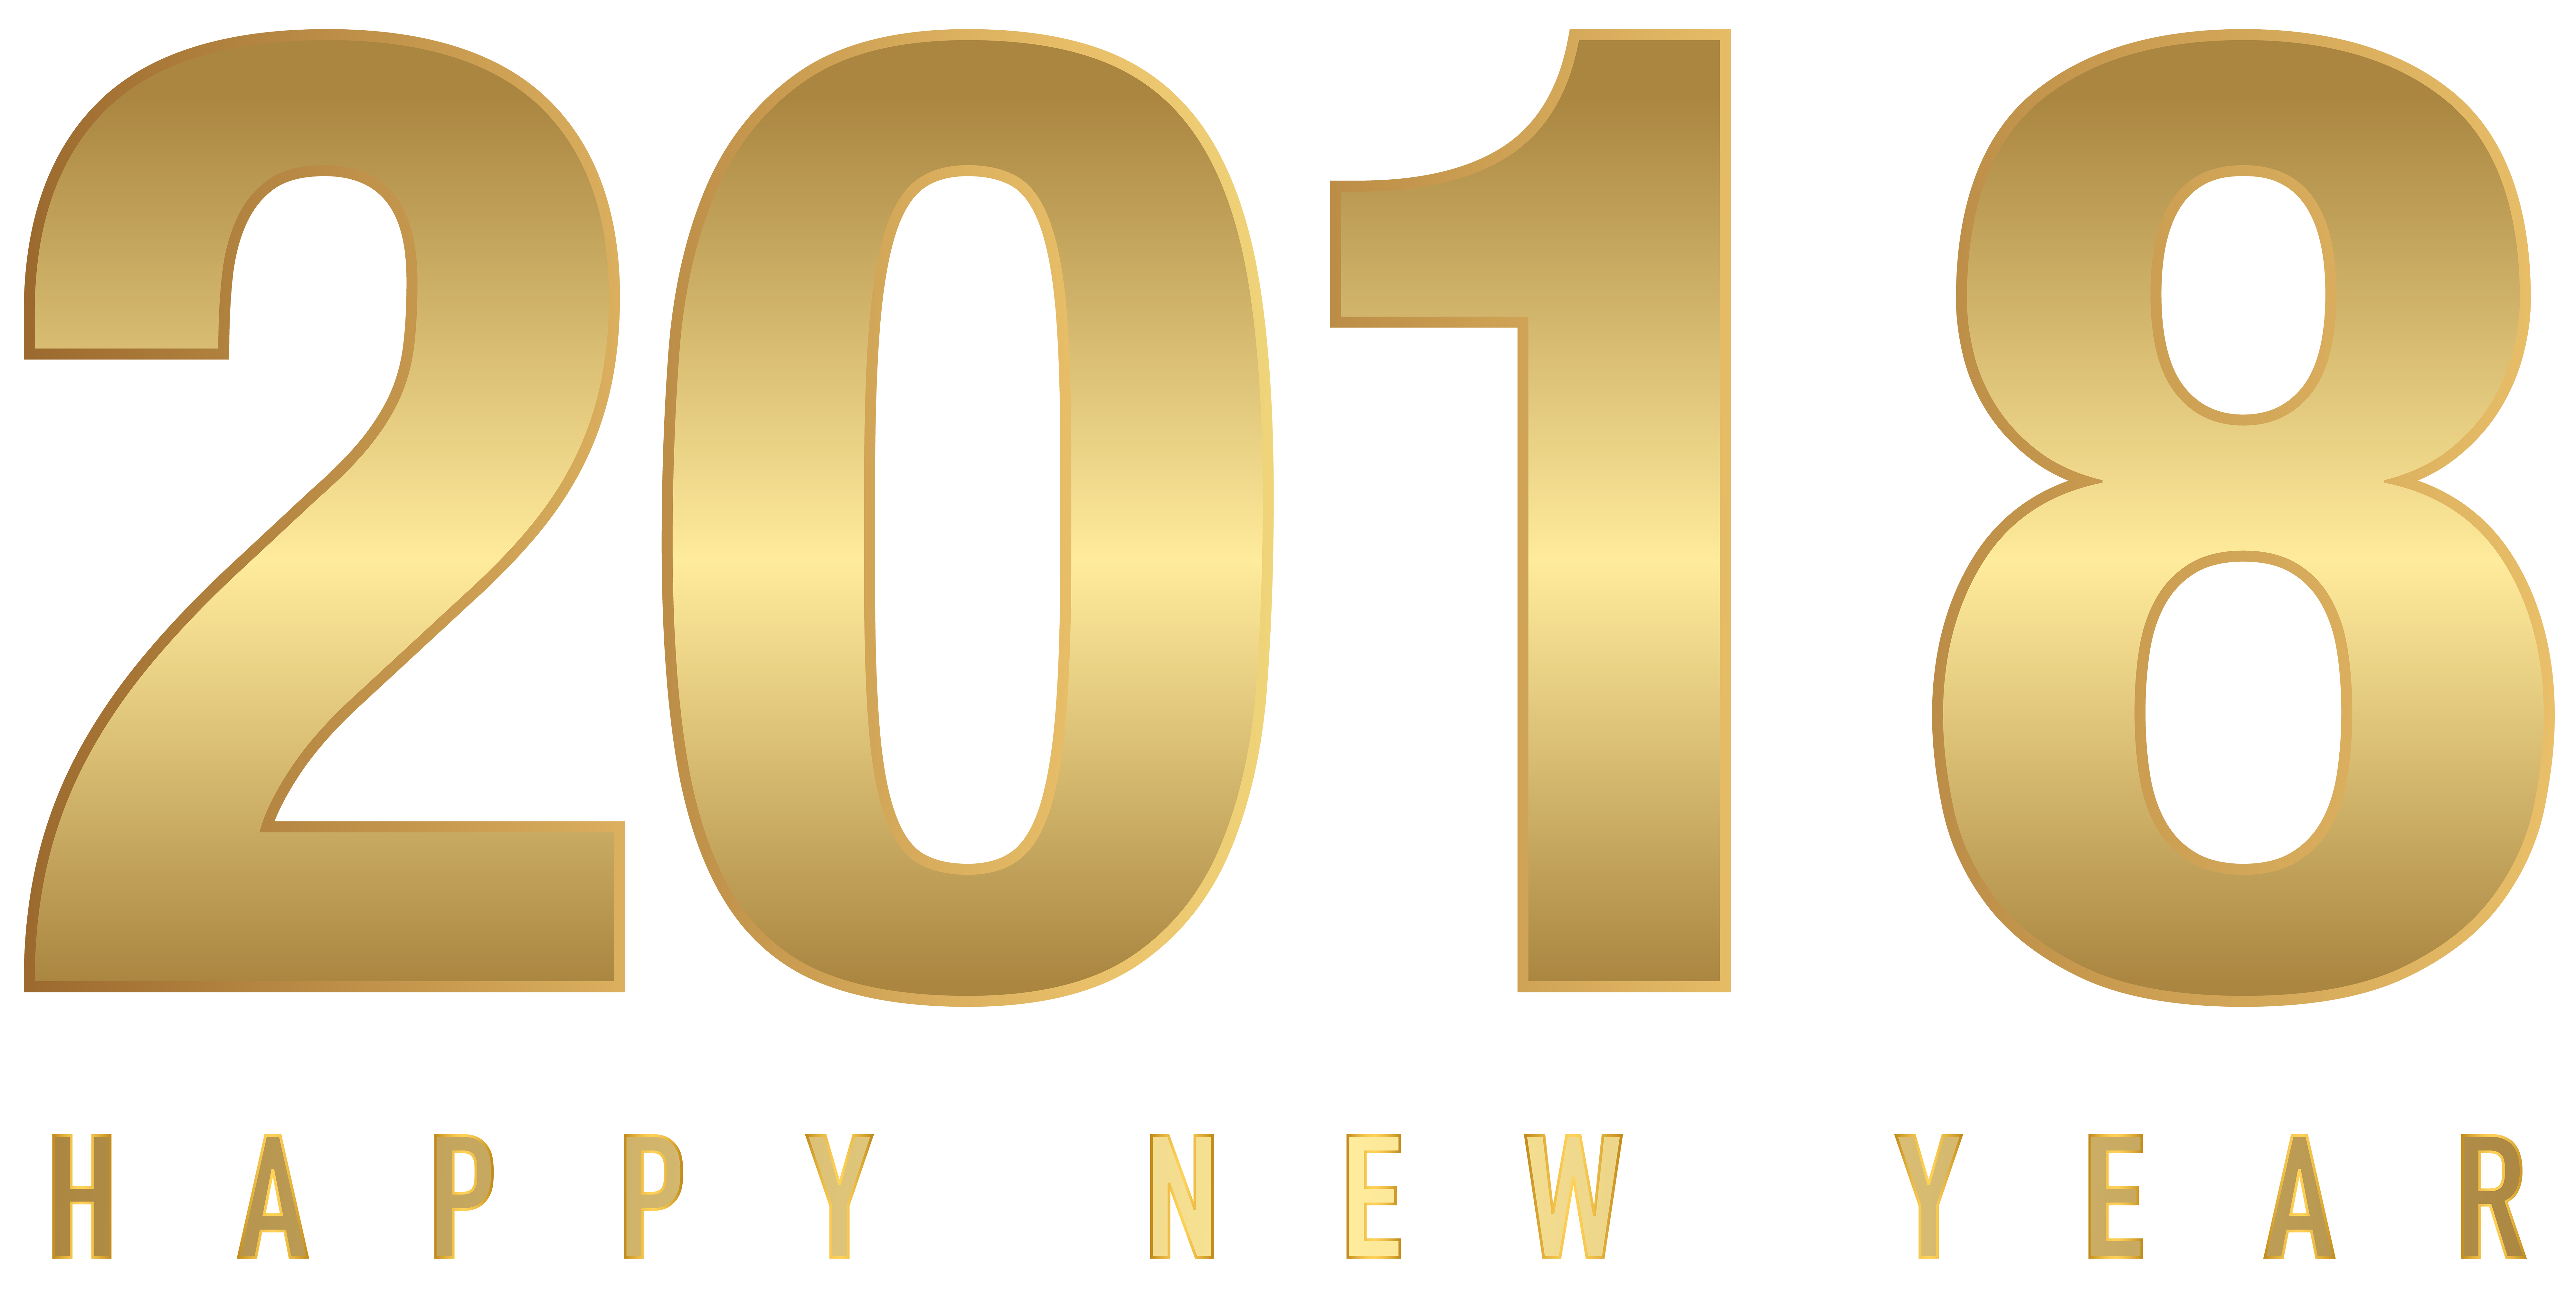 New Years Clipart 2018 at GetDrawings.com.